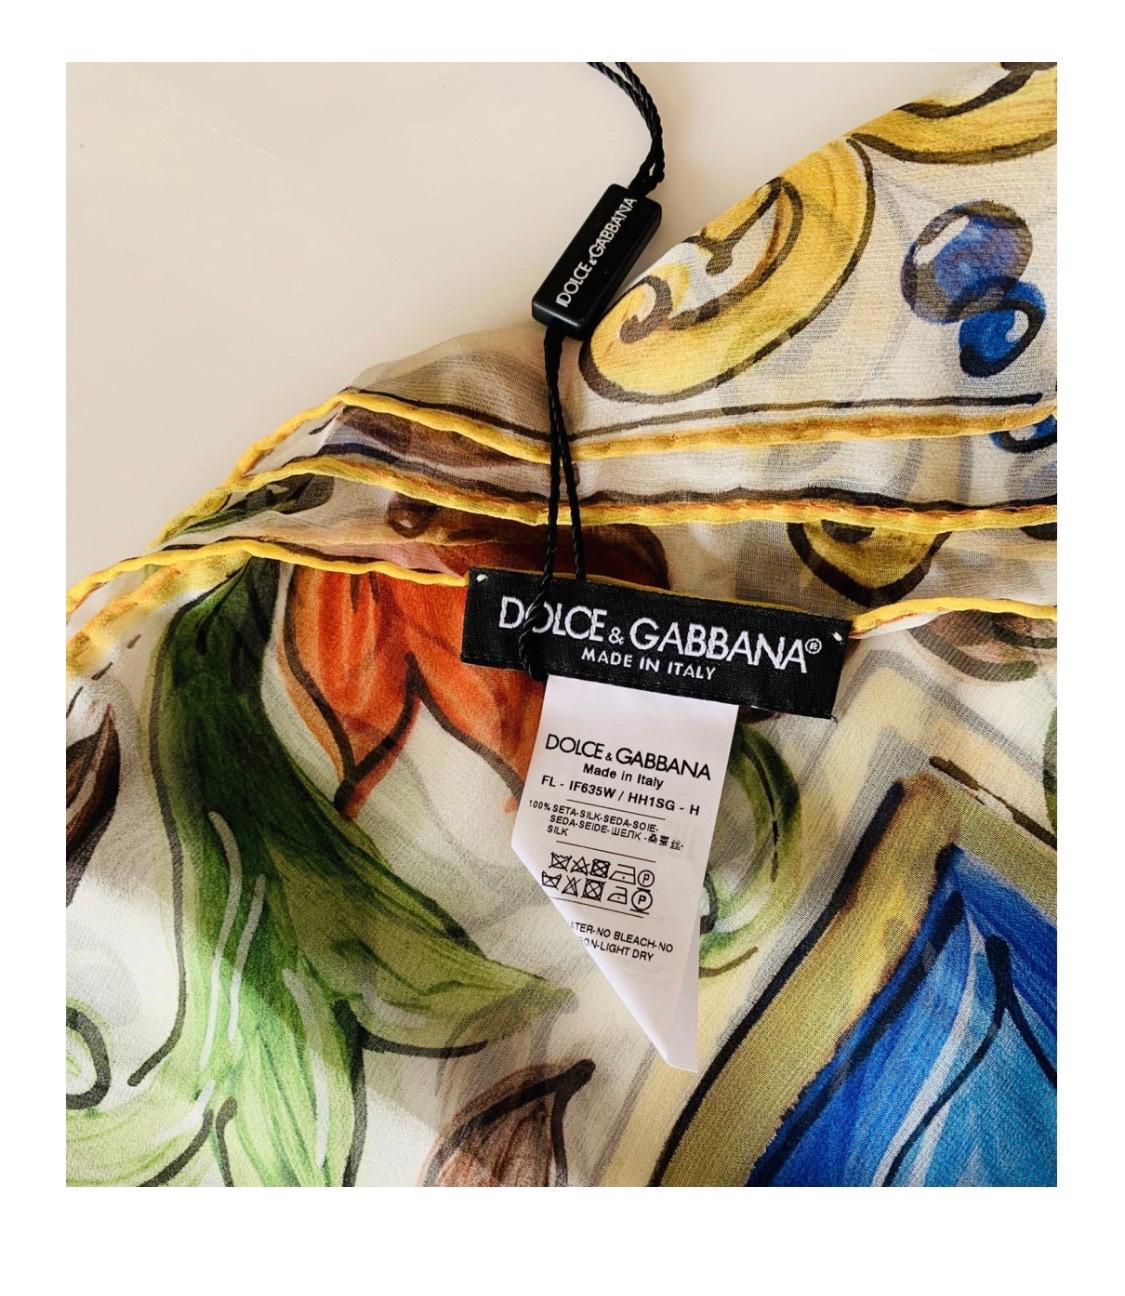 Dolce & Gabbana Maiolica silk twill
scarf

Size 83x83cm

100% silk

Very light airy luxury twill

Brand new with tags!

Please check my other DG clothing &

accessories!
